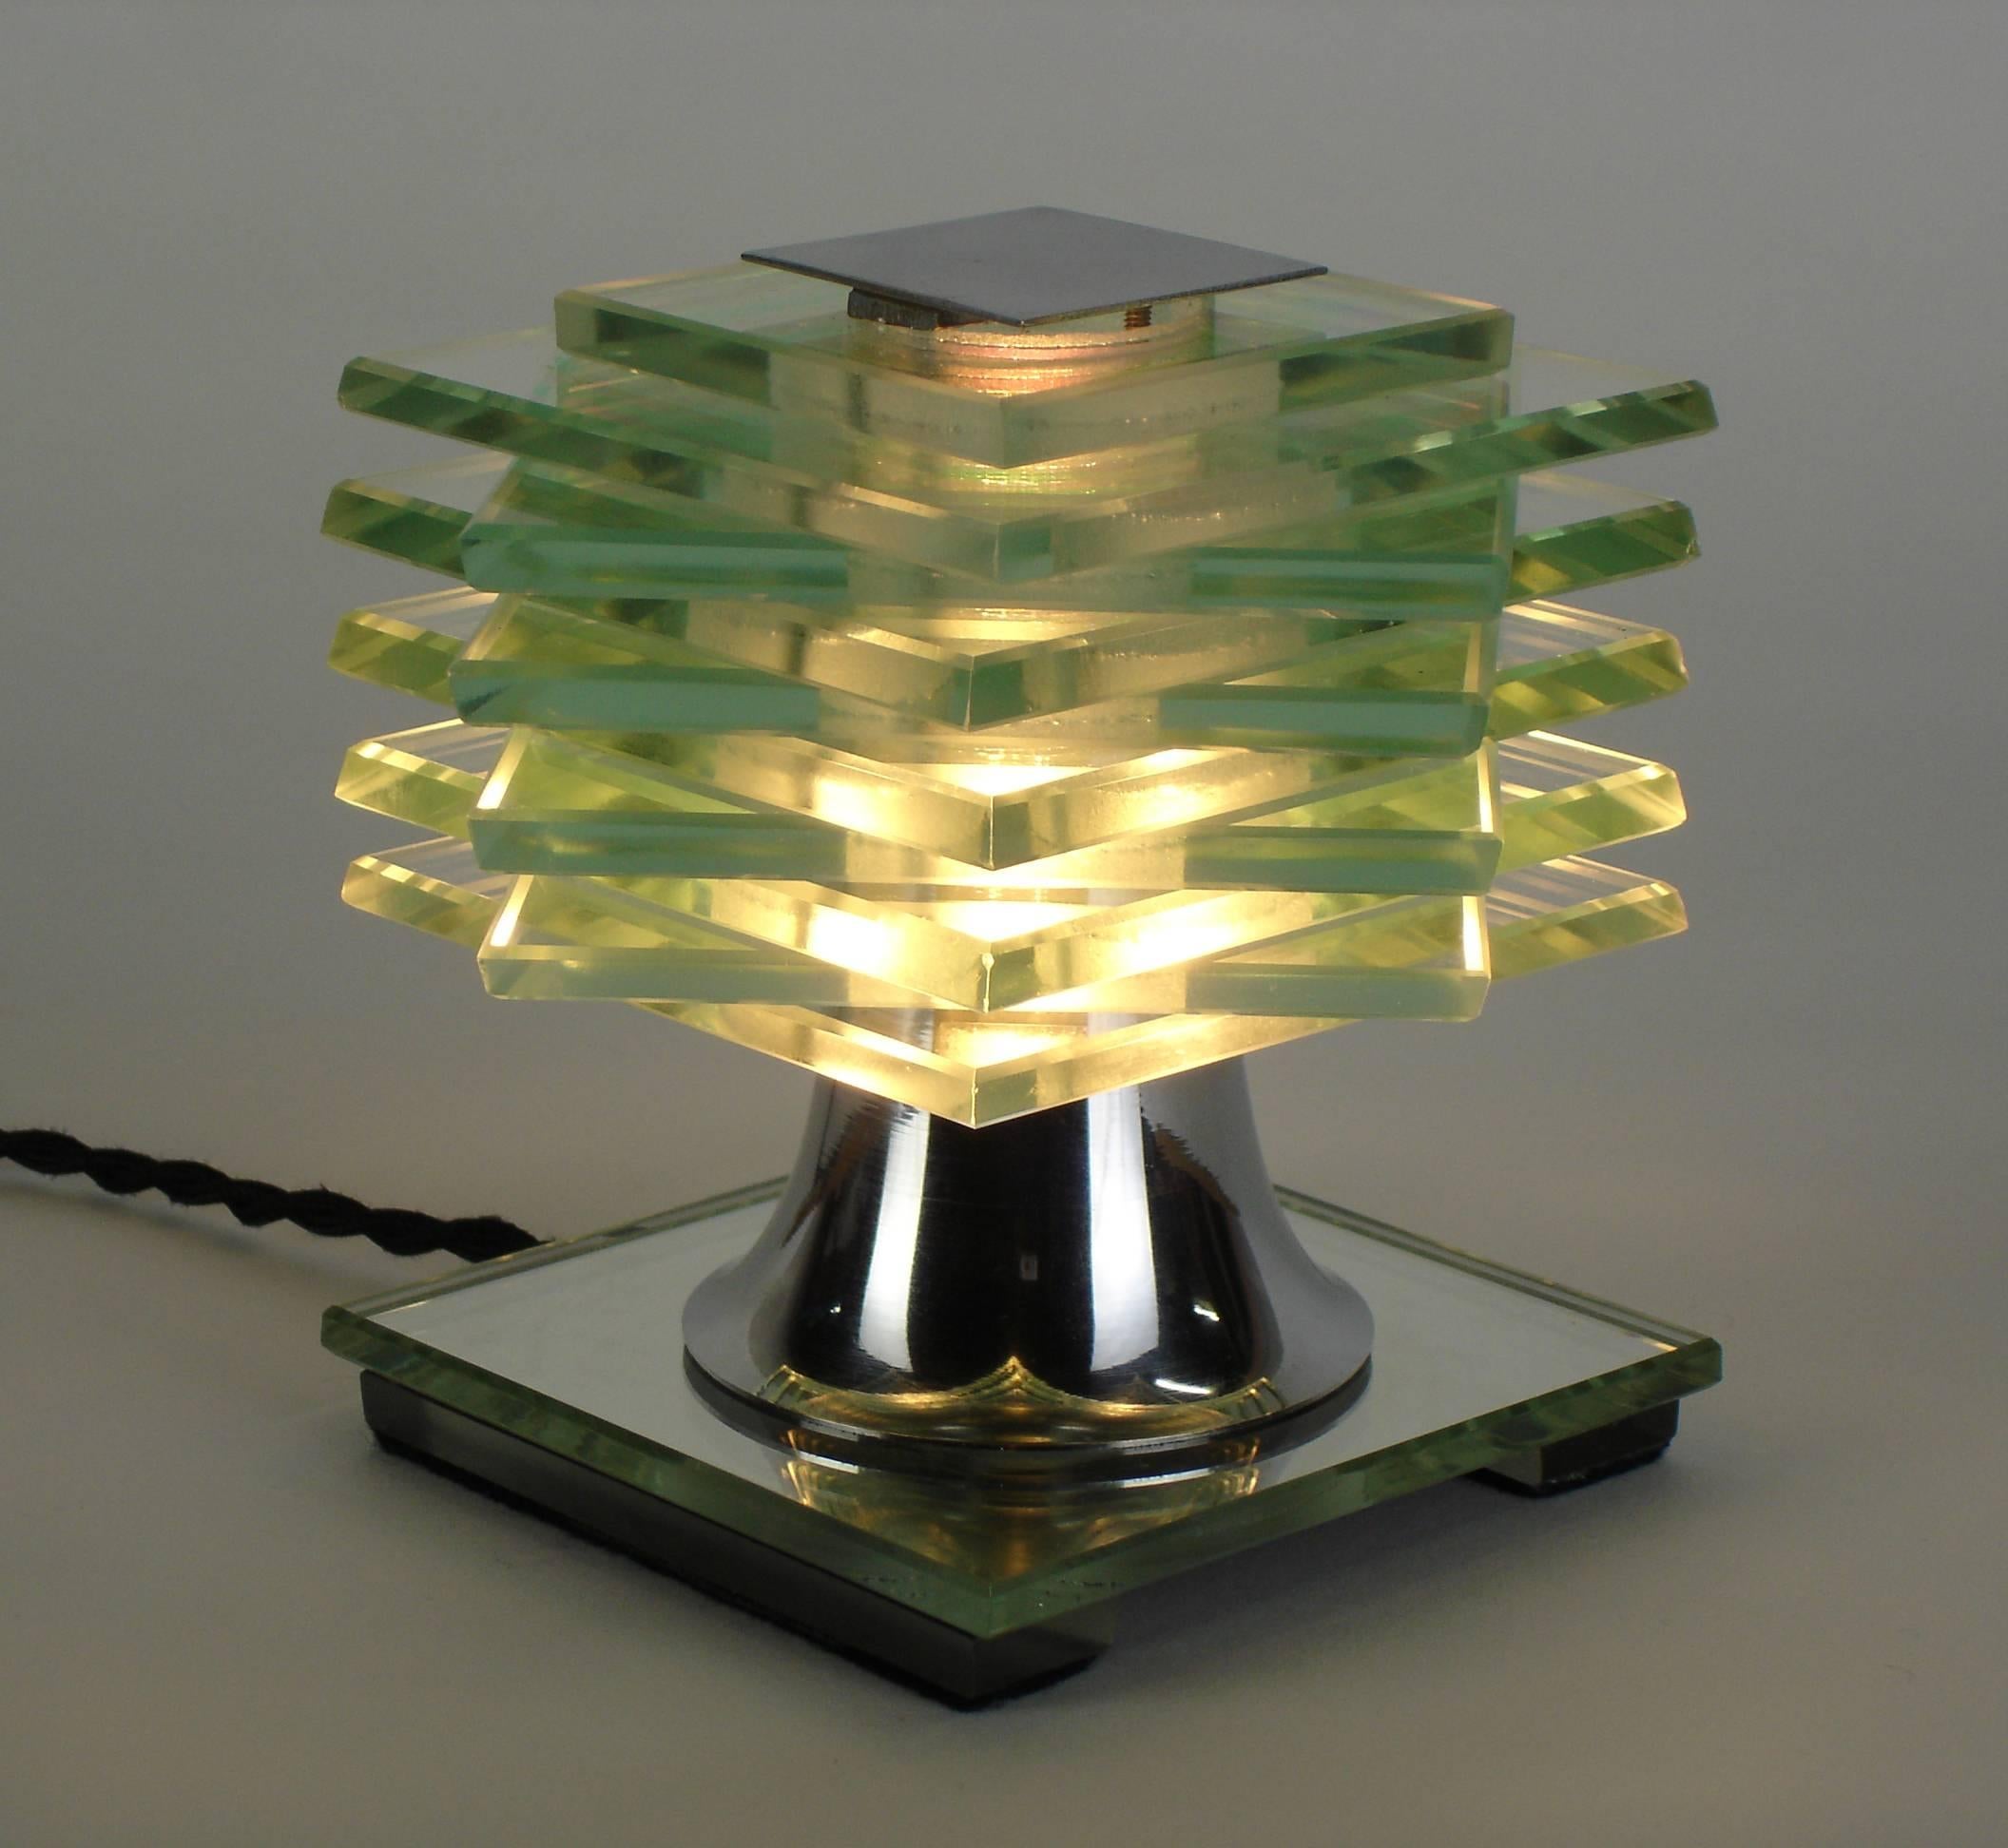 Art Deco Table Lamp Designed by Desny 1